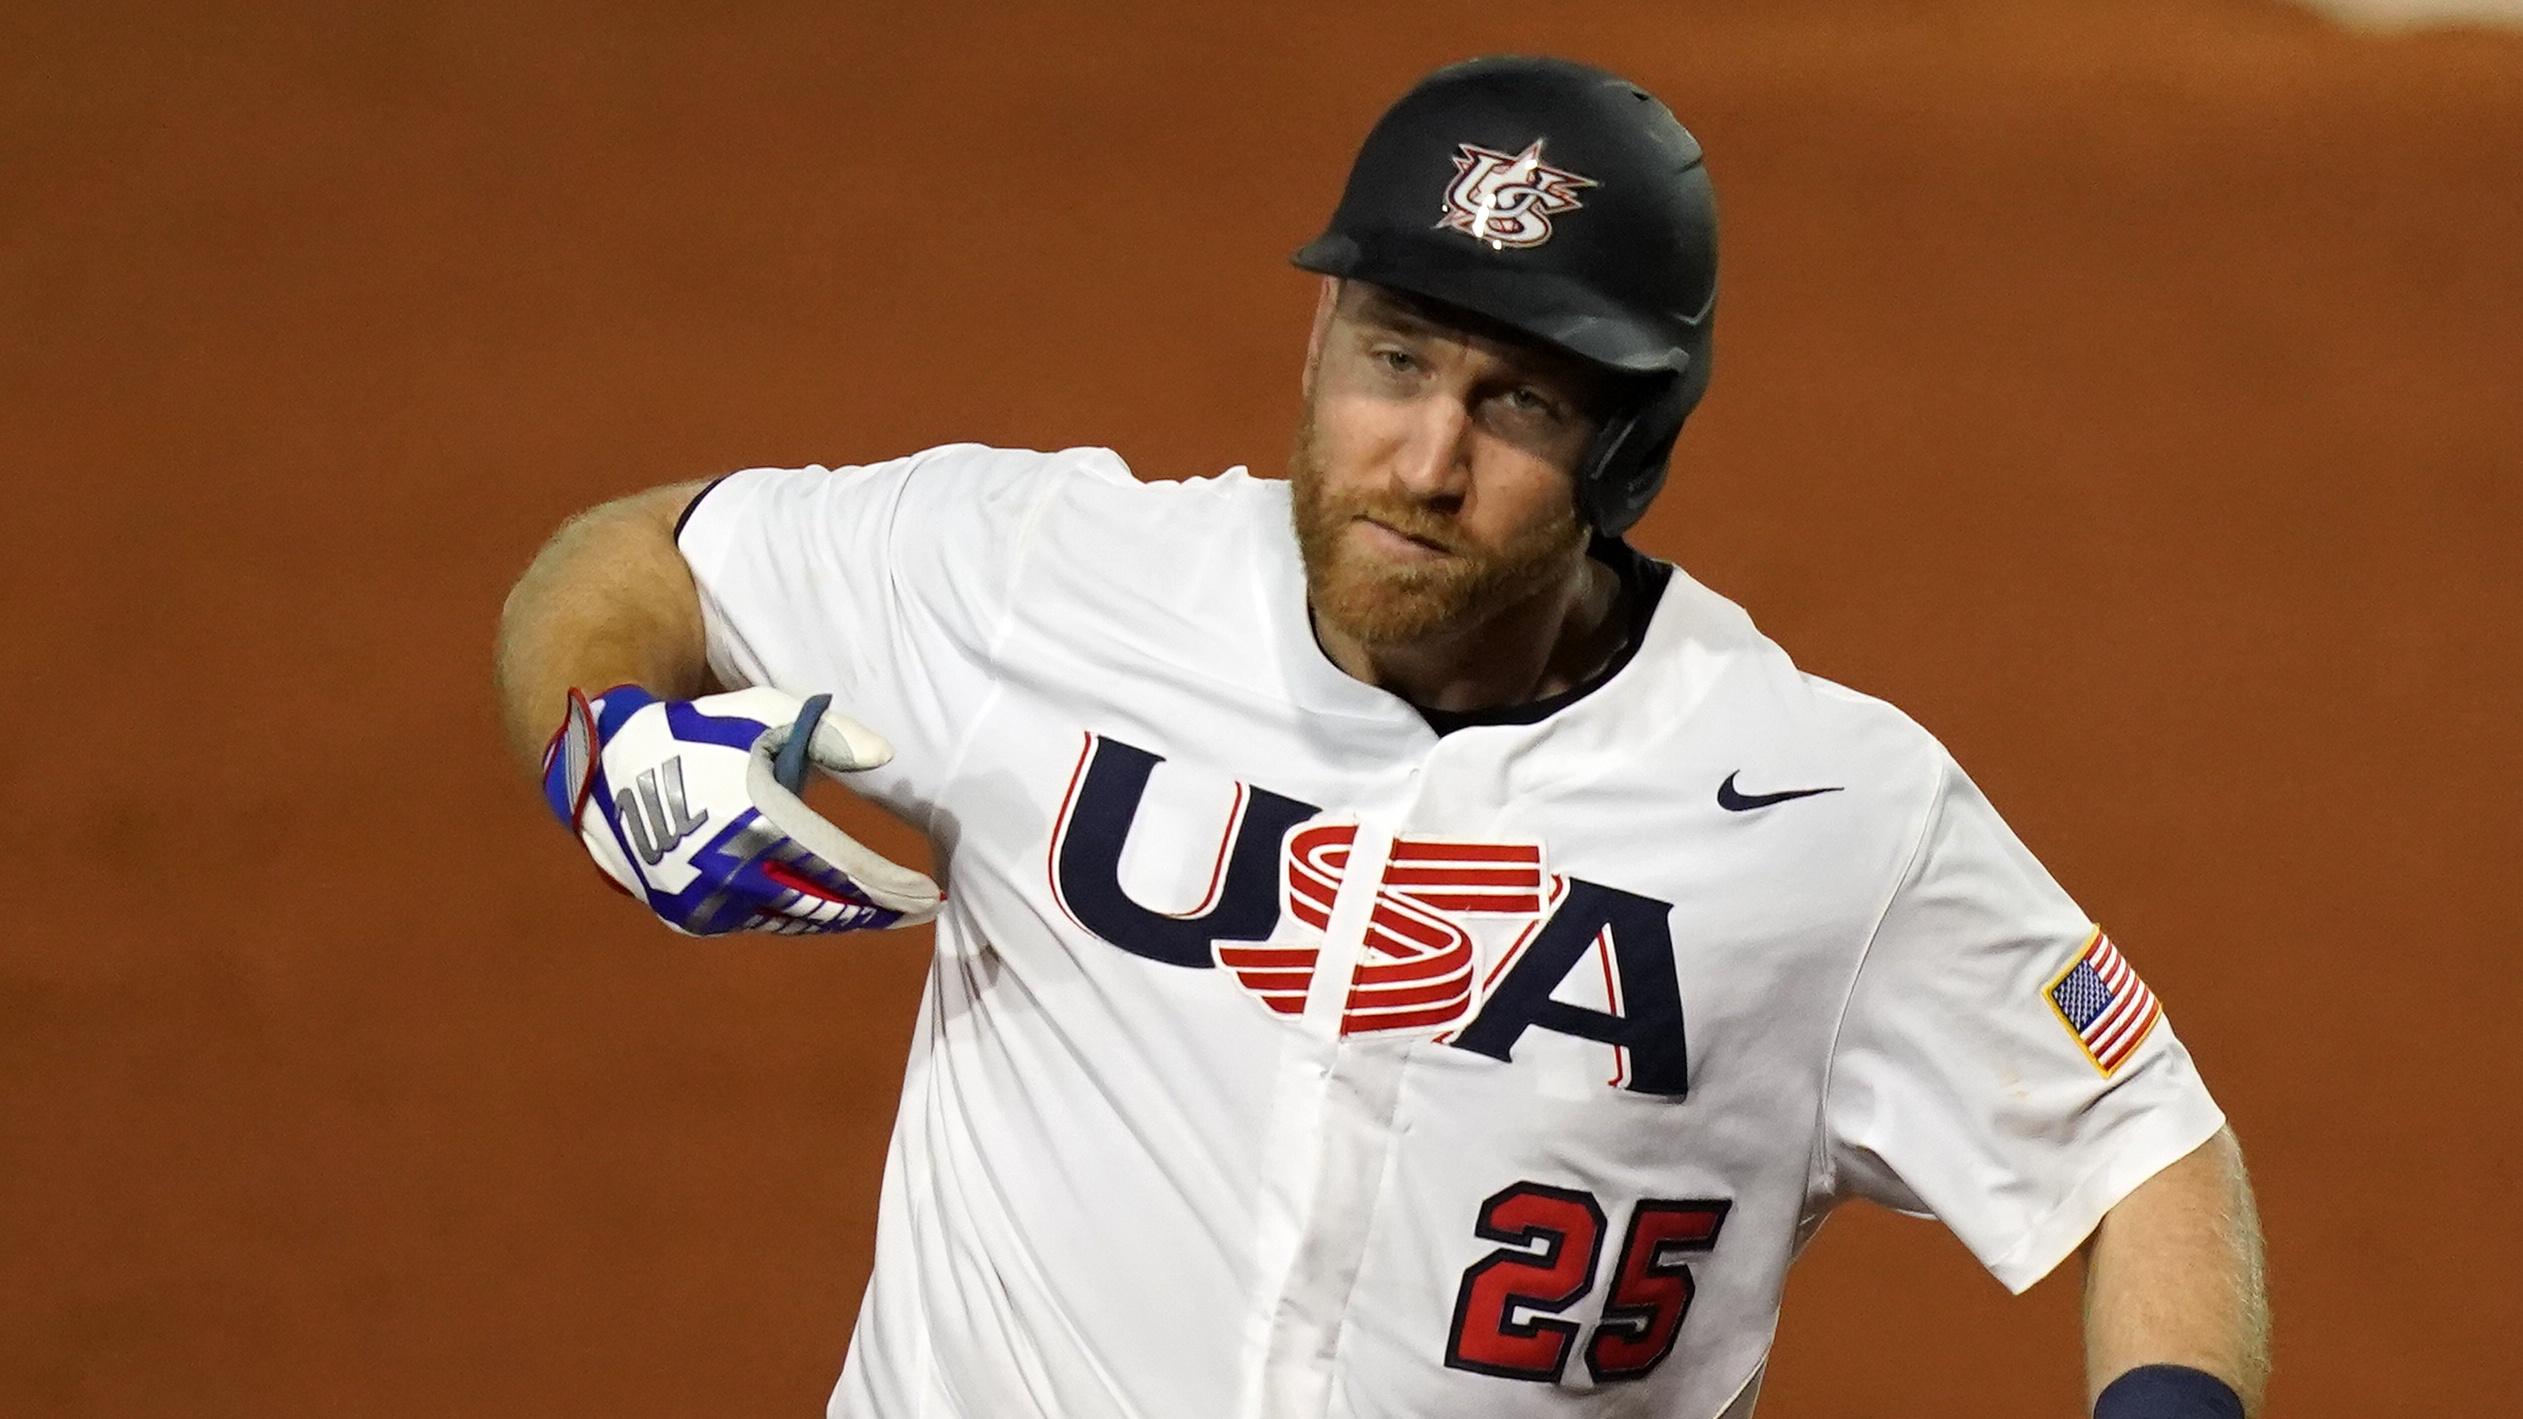 Jun 5, 2021; Port St. Lucie, Florida, USA; USA third baseman Todd Frazier (25) points to his chest while he rounds the bases after hitting a solo homerun in the 7th inning against Venezuela in the Super Round of the WBSC Baseball Americas Qualifier series at Clover Park. / © Jasen Vinlove-USA TODAY Sports